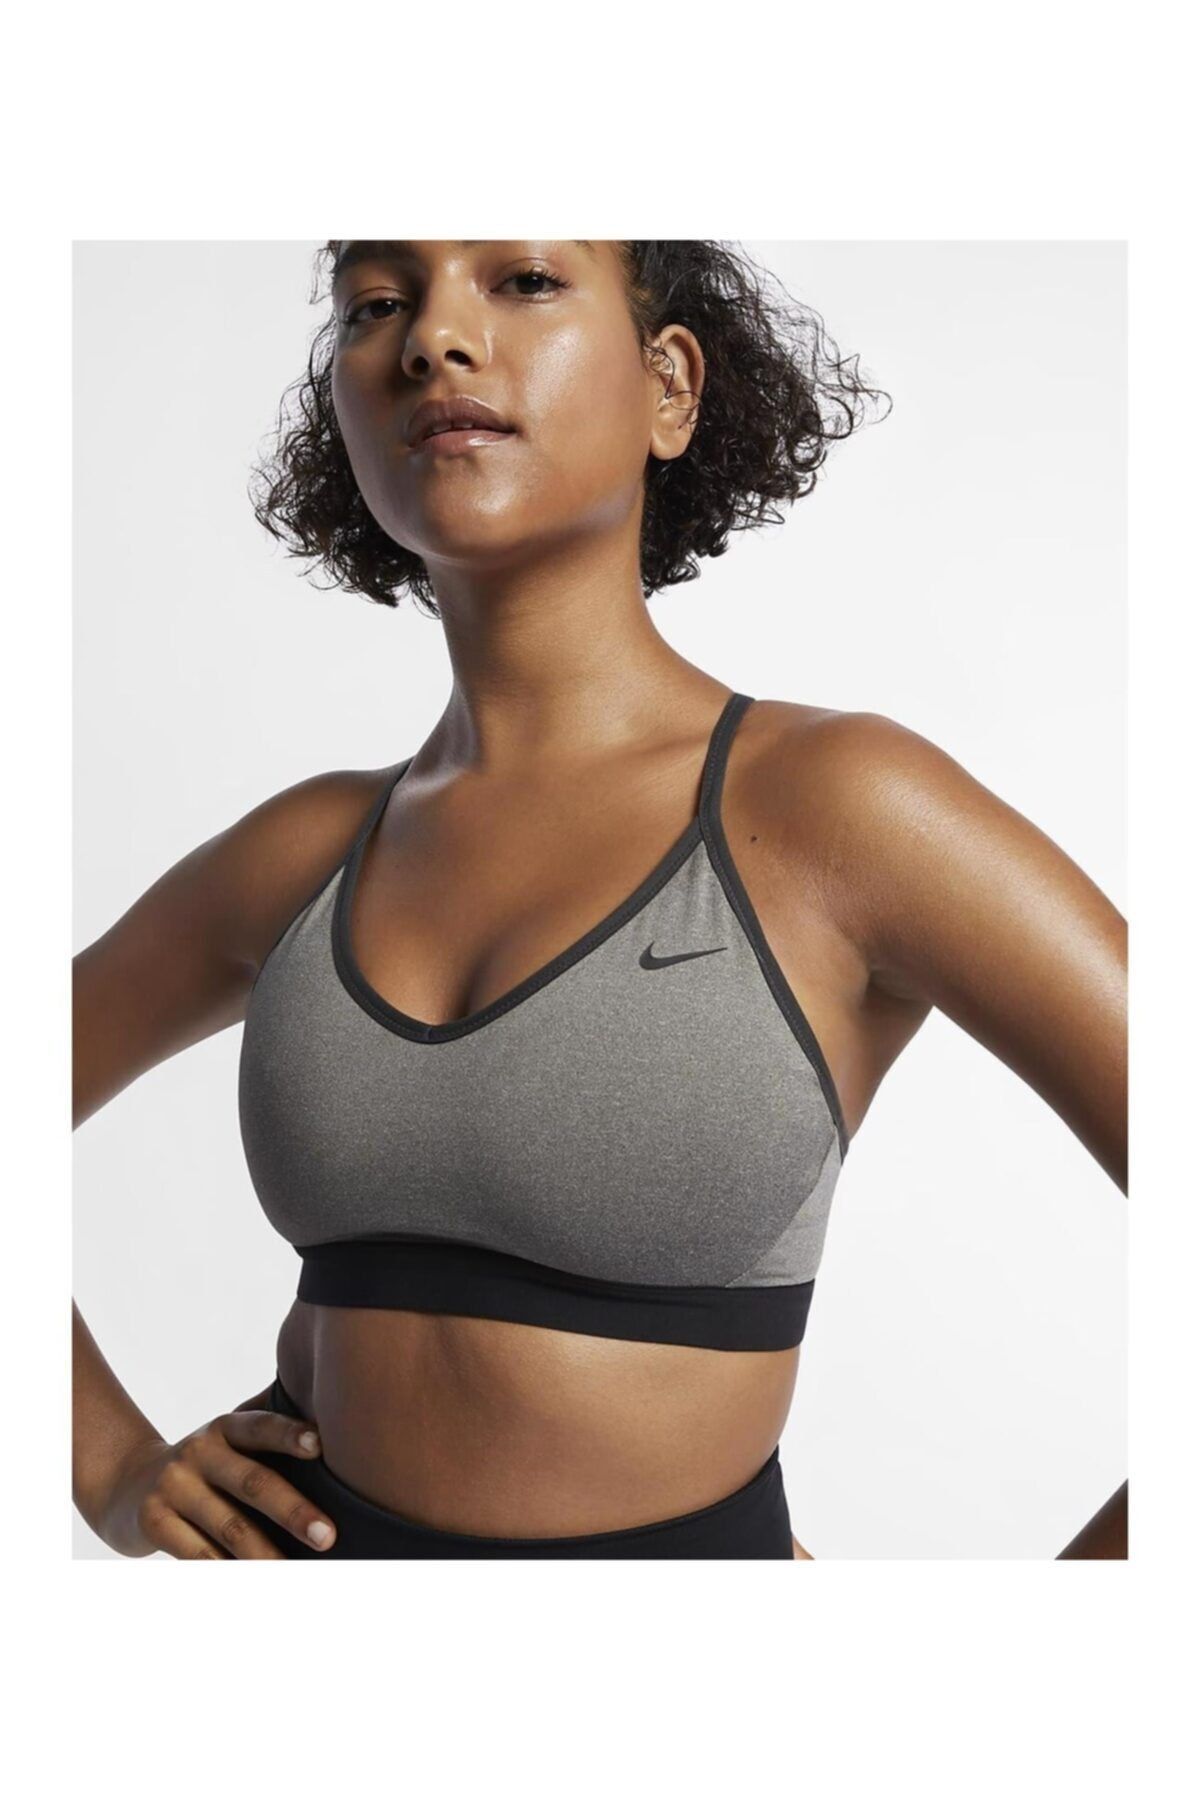 NIKE AIR INDY Women's Light-Support Non-Padded Printed Sports Bra - Small -  New £24.95 - PicClick UK